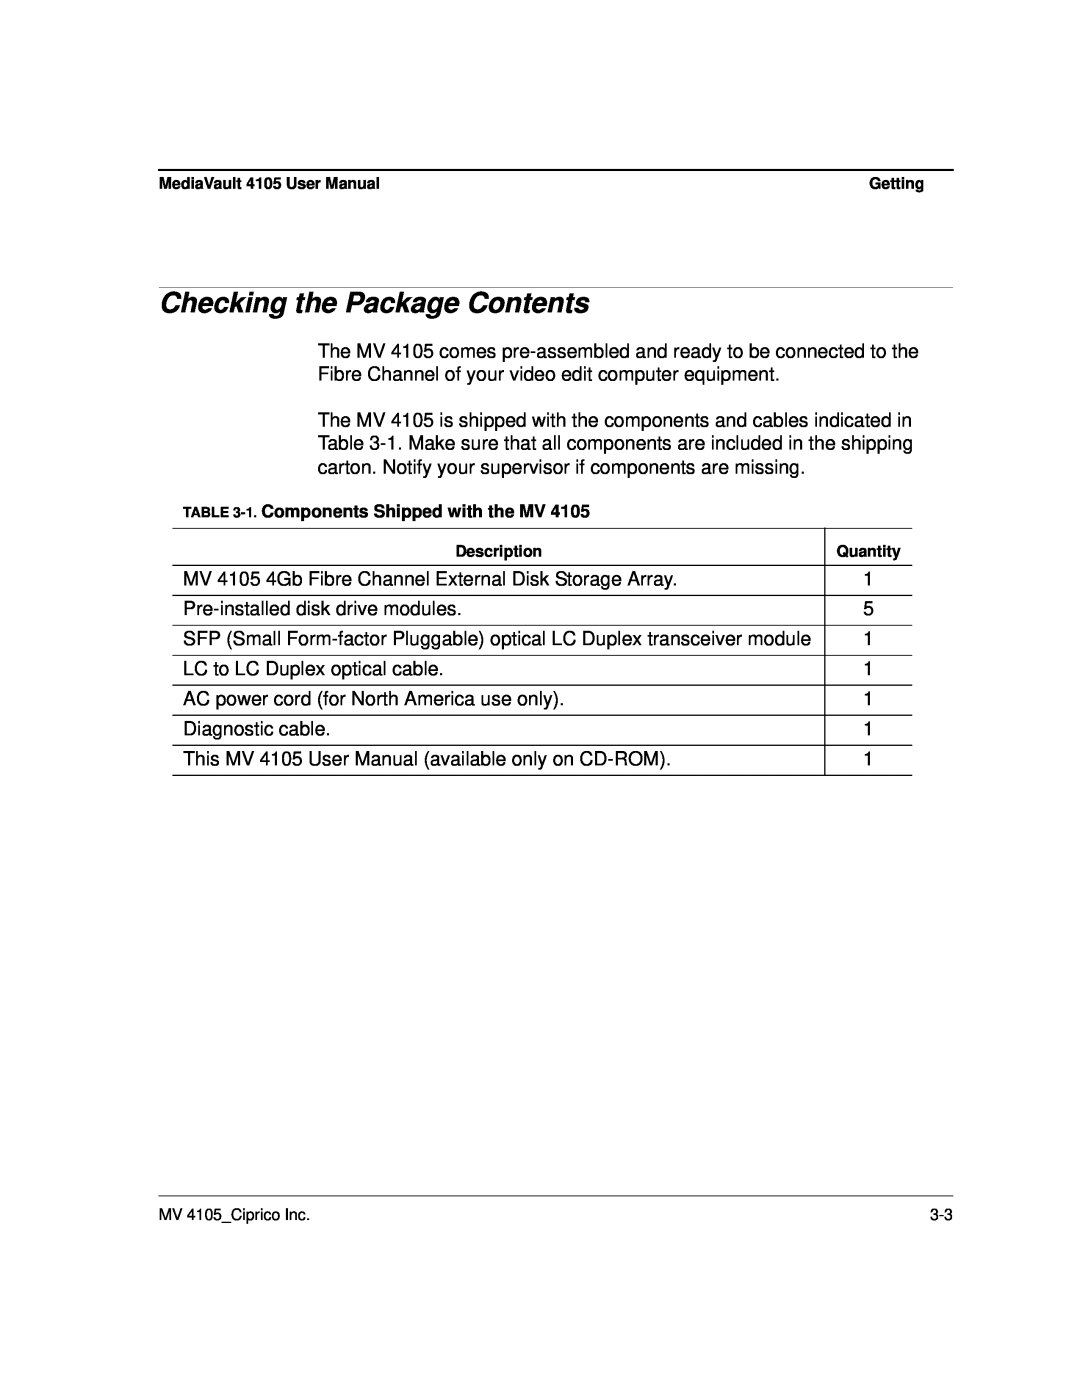 Ciprico 4105 Series user manual Checking the Package Contents 